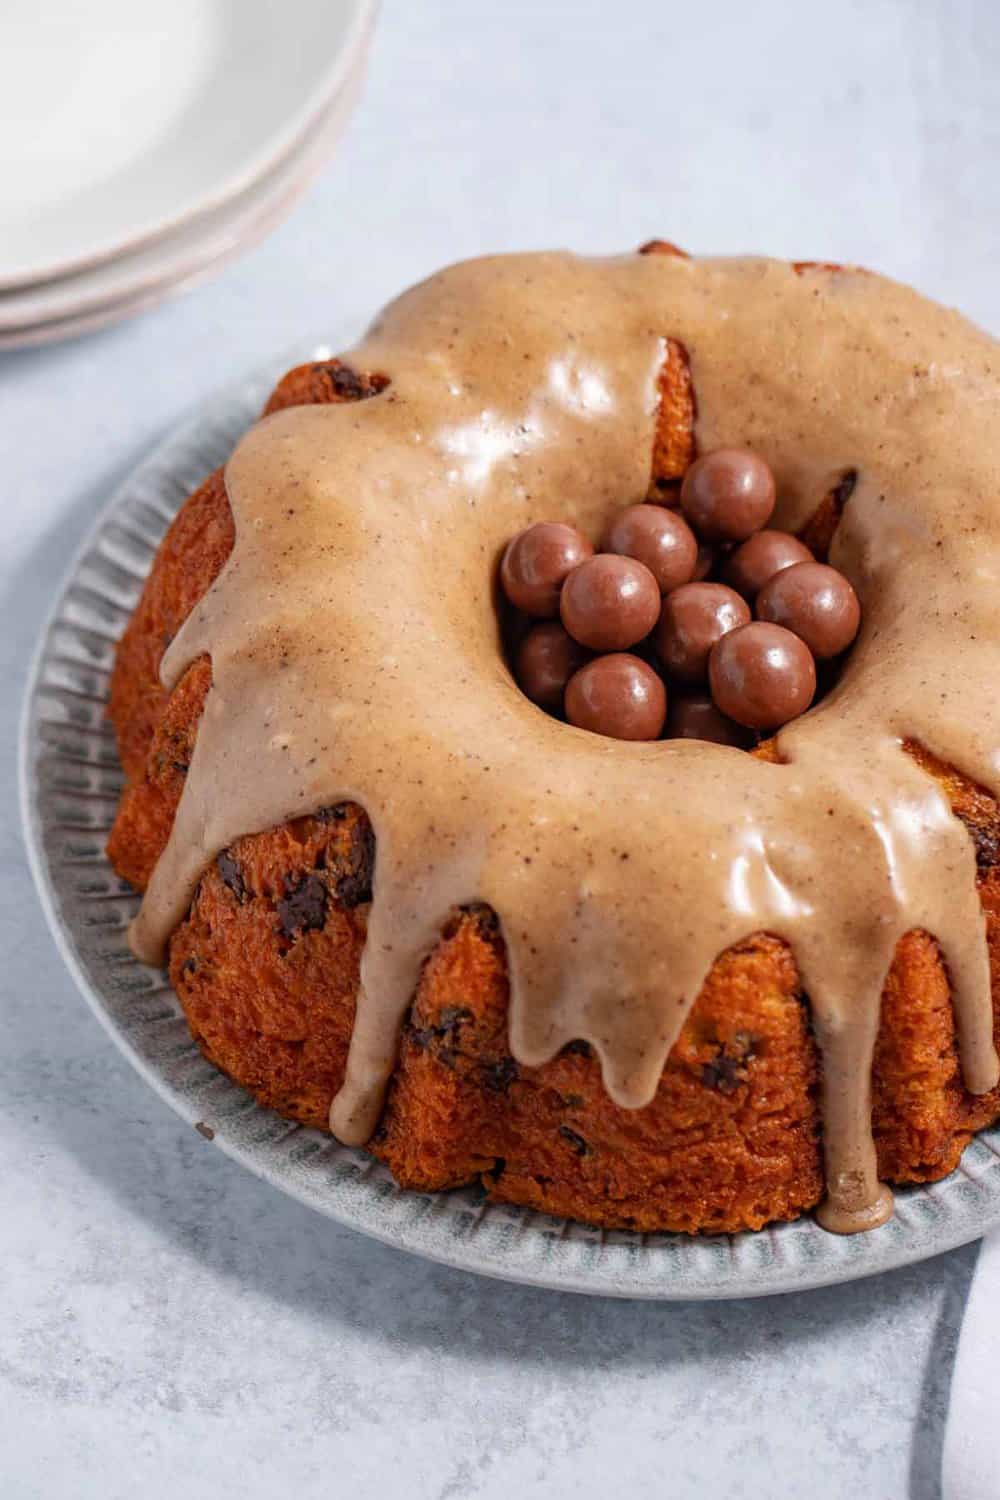 chocolate chip bundt cake with whoppers in the center